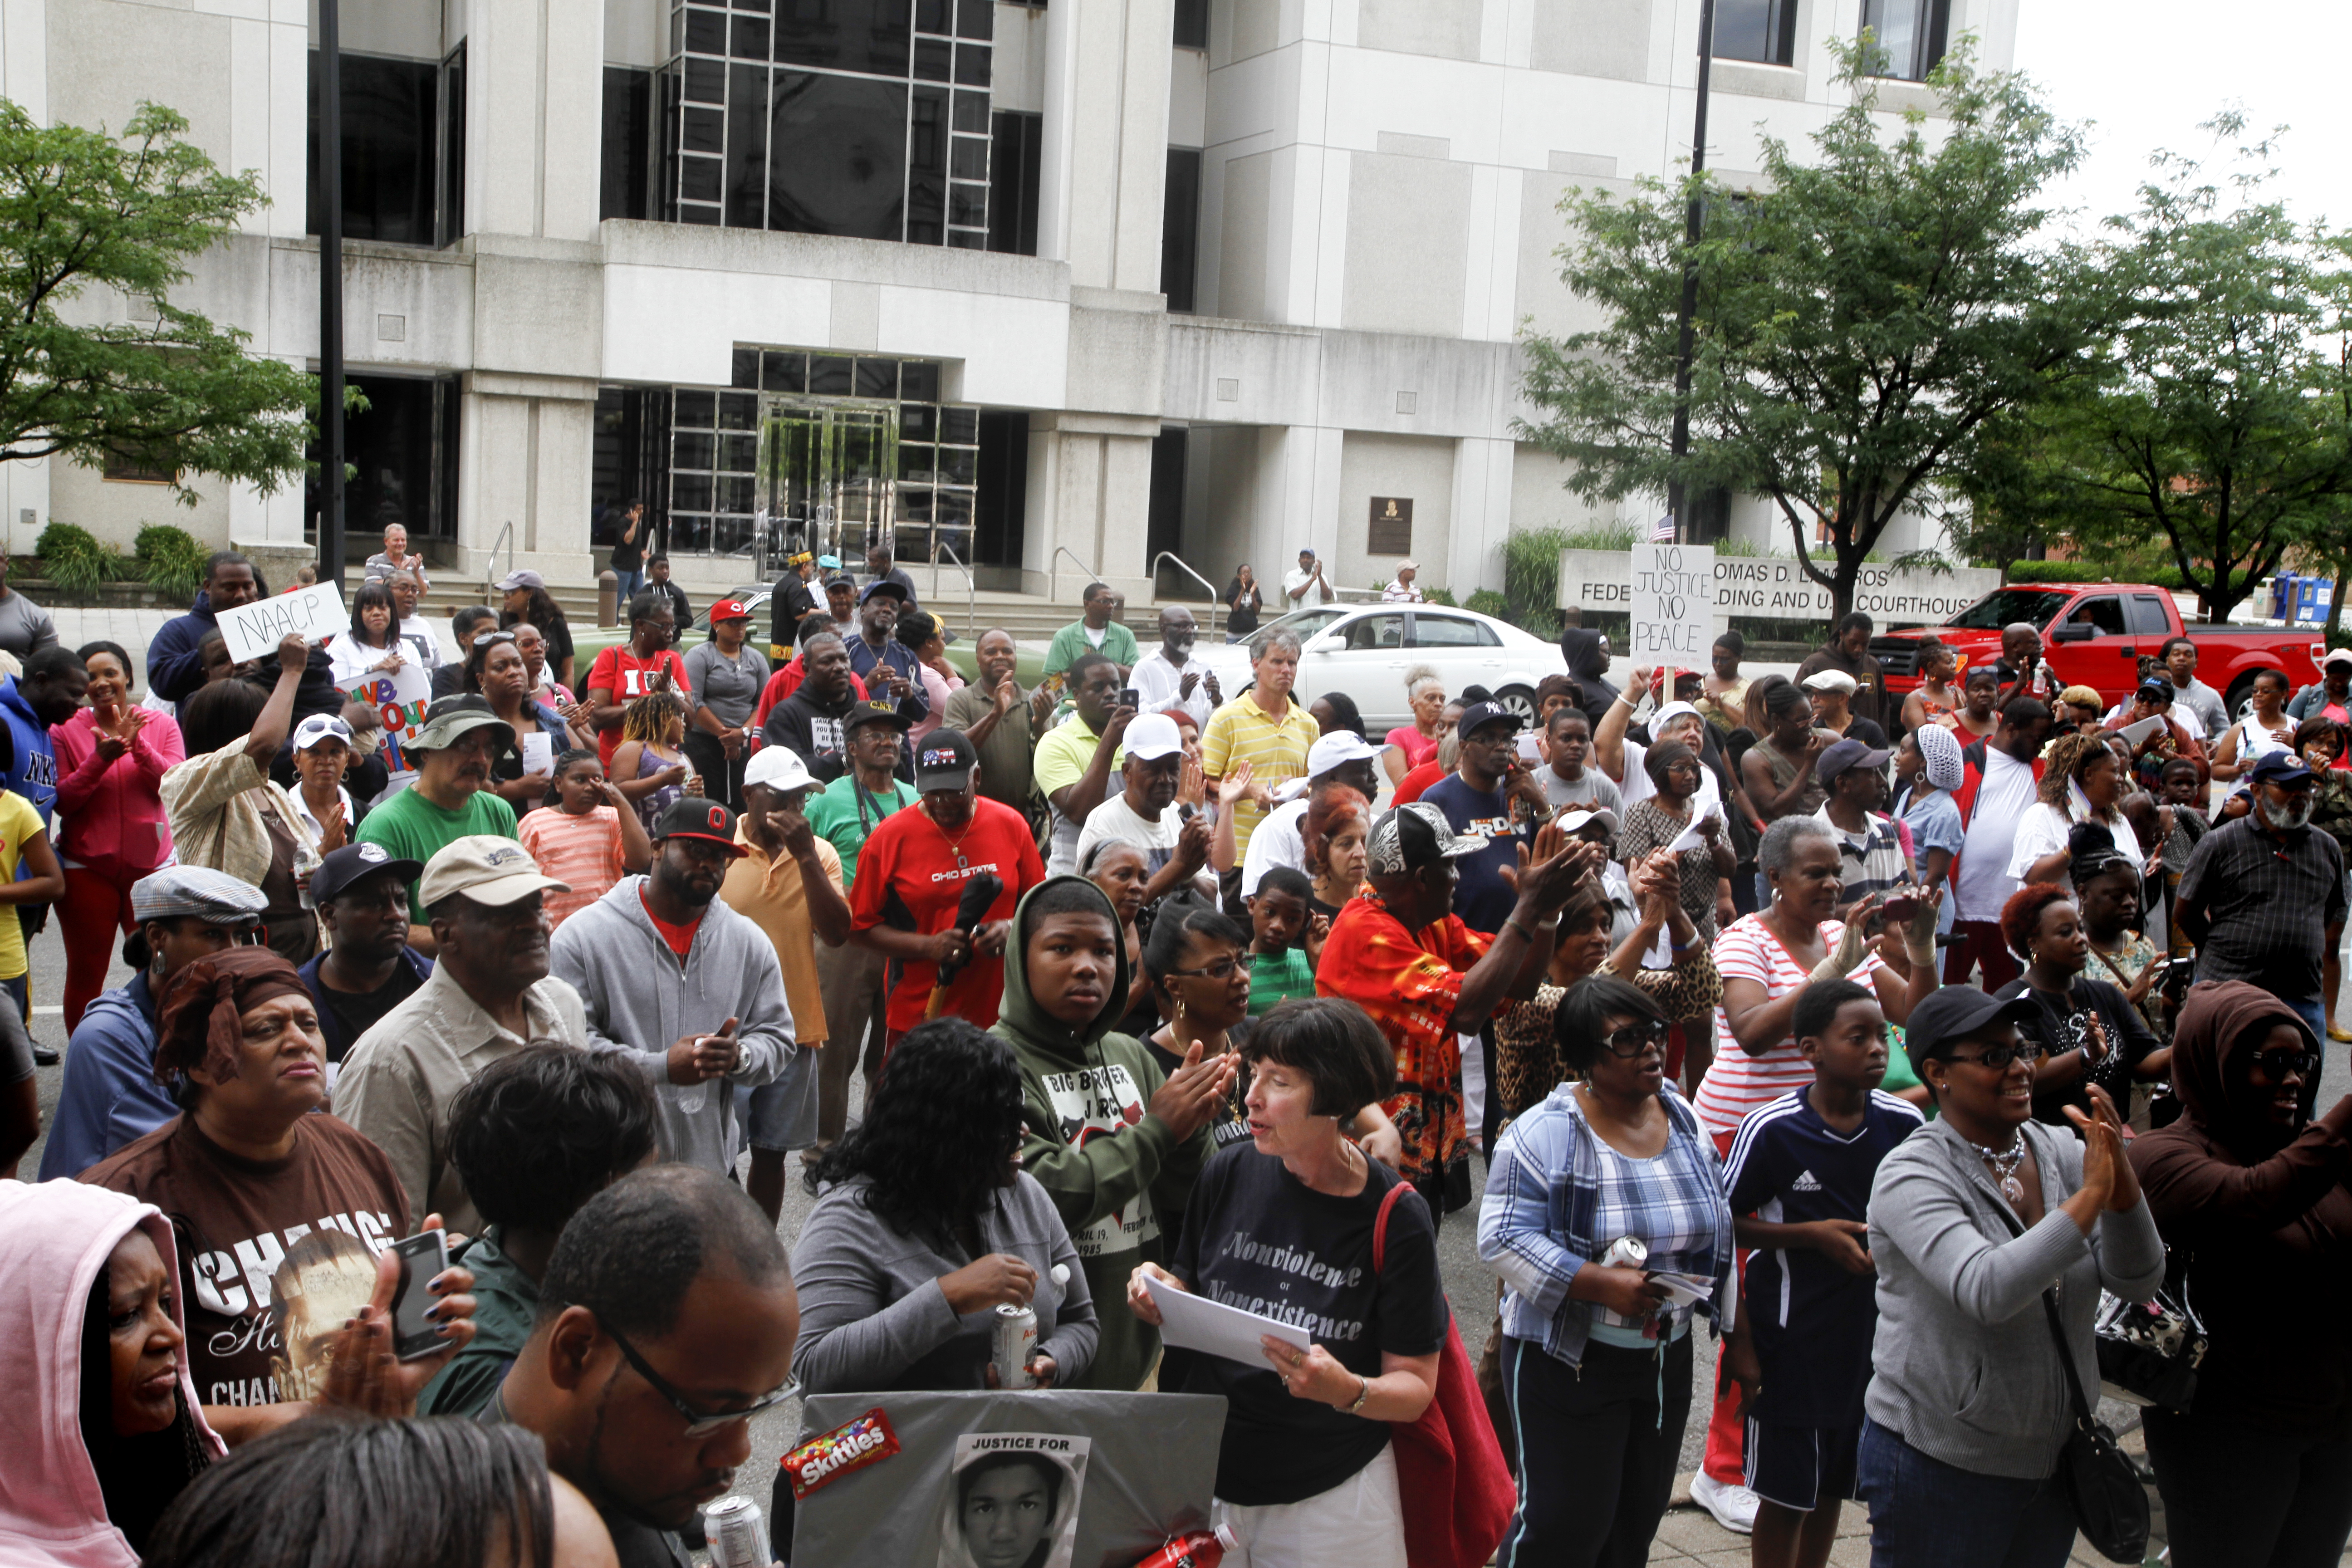 MADELYN P. HASTINGS | THE VINDICATOR

A "Justice for Trayvon" rally was held in reaction to the Zimmerman verdict on the steps of the Mahoning County Courthouse on Saturday, July 20.  